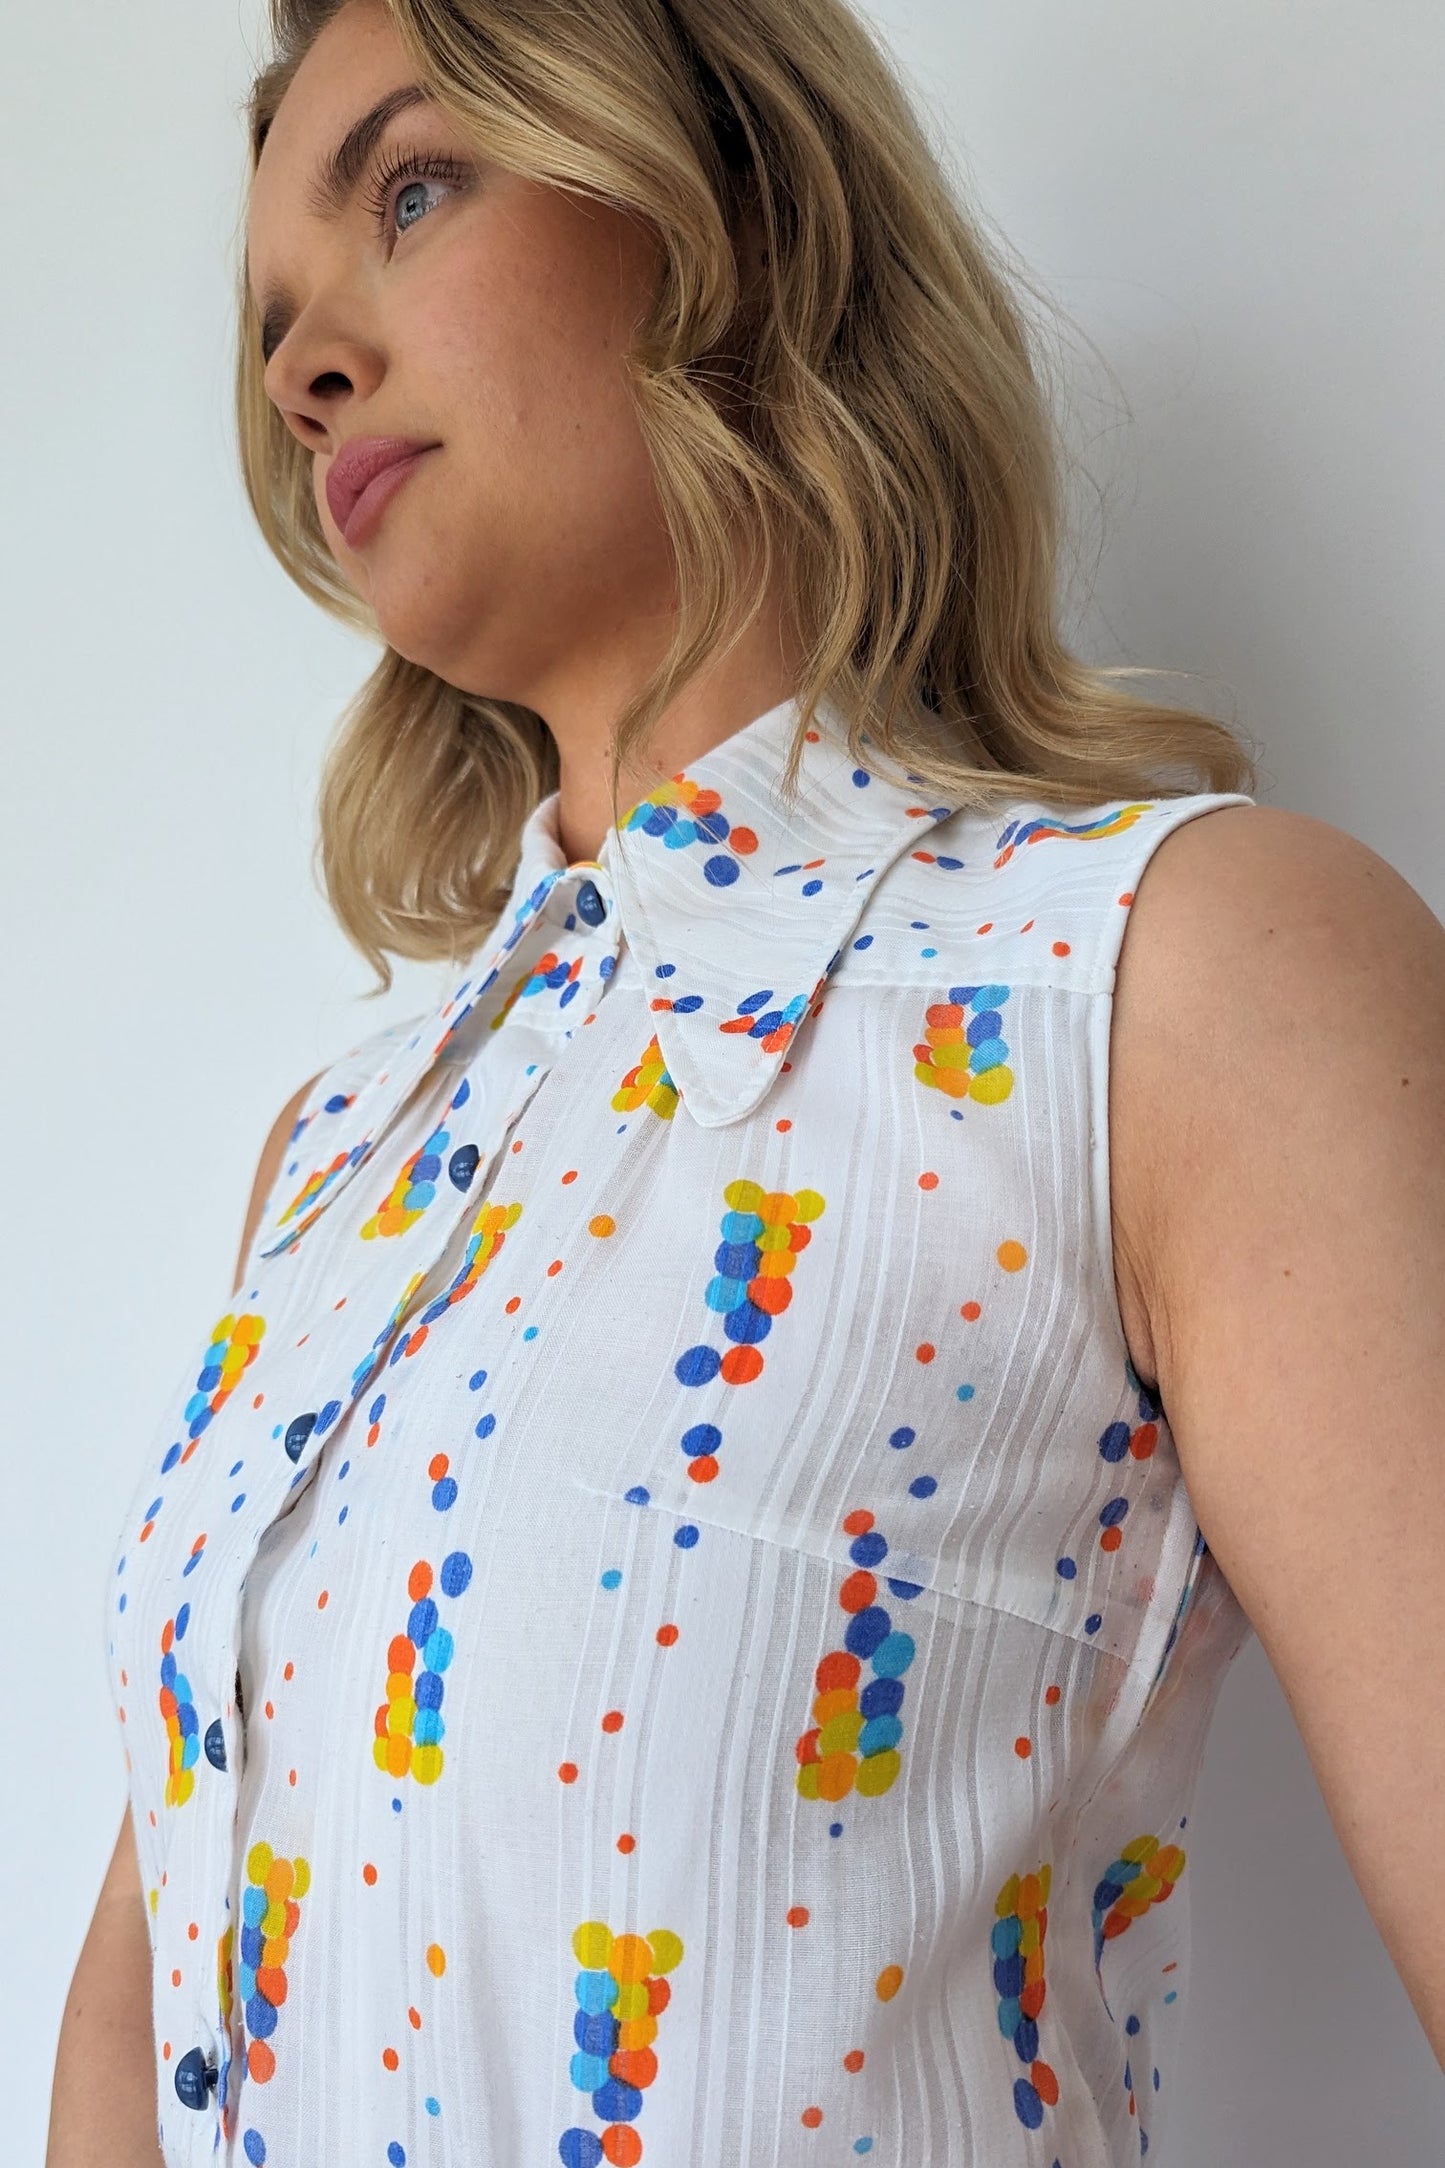 top of dress from 60s showing dagger collar and white fabric with blue, yellow and orange spots